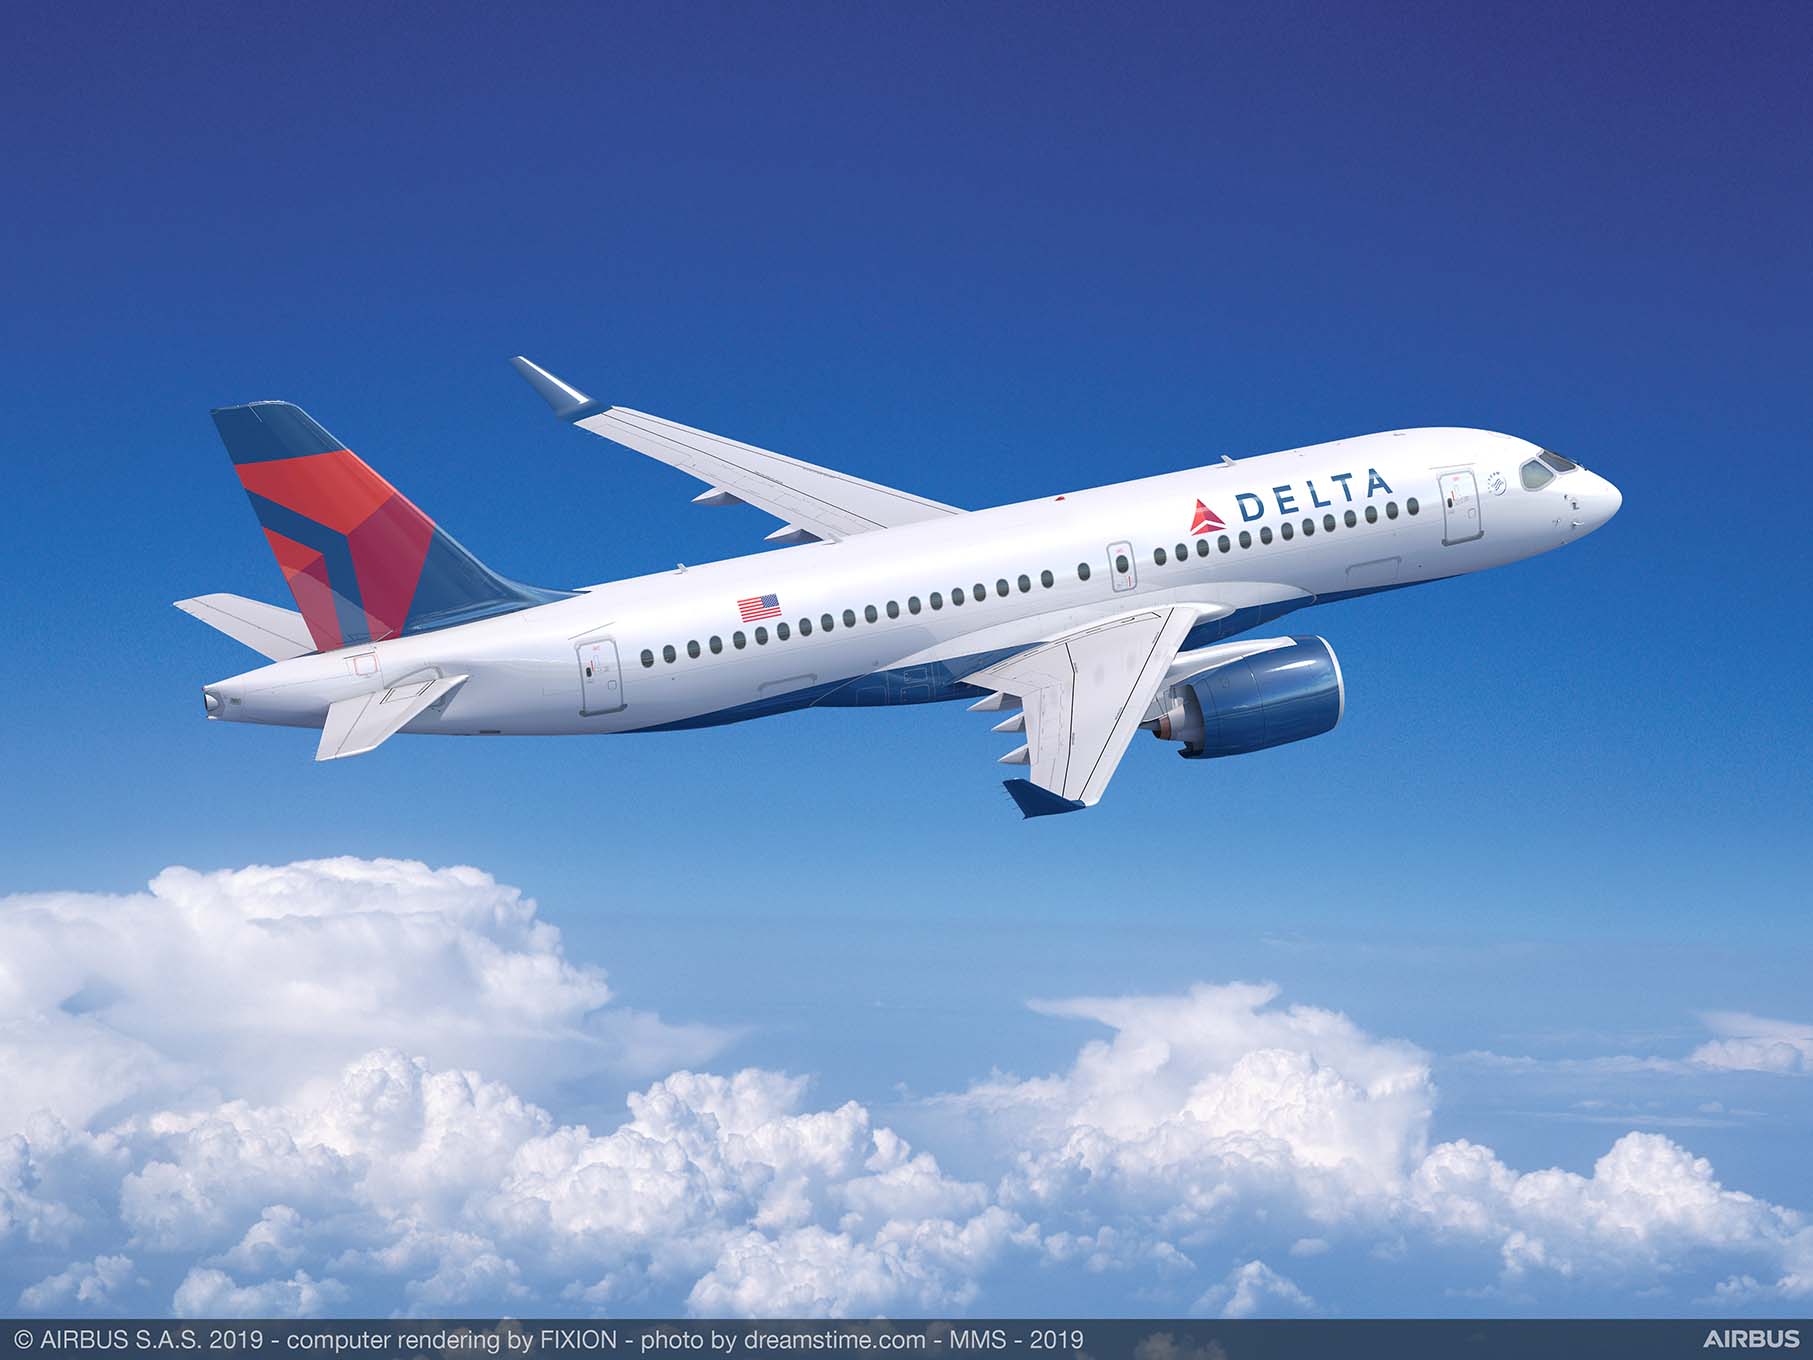 Delta’s sanguine outlook endorsed by analysts